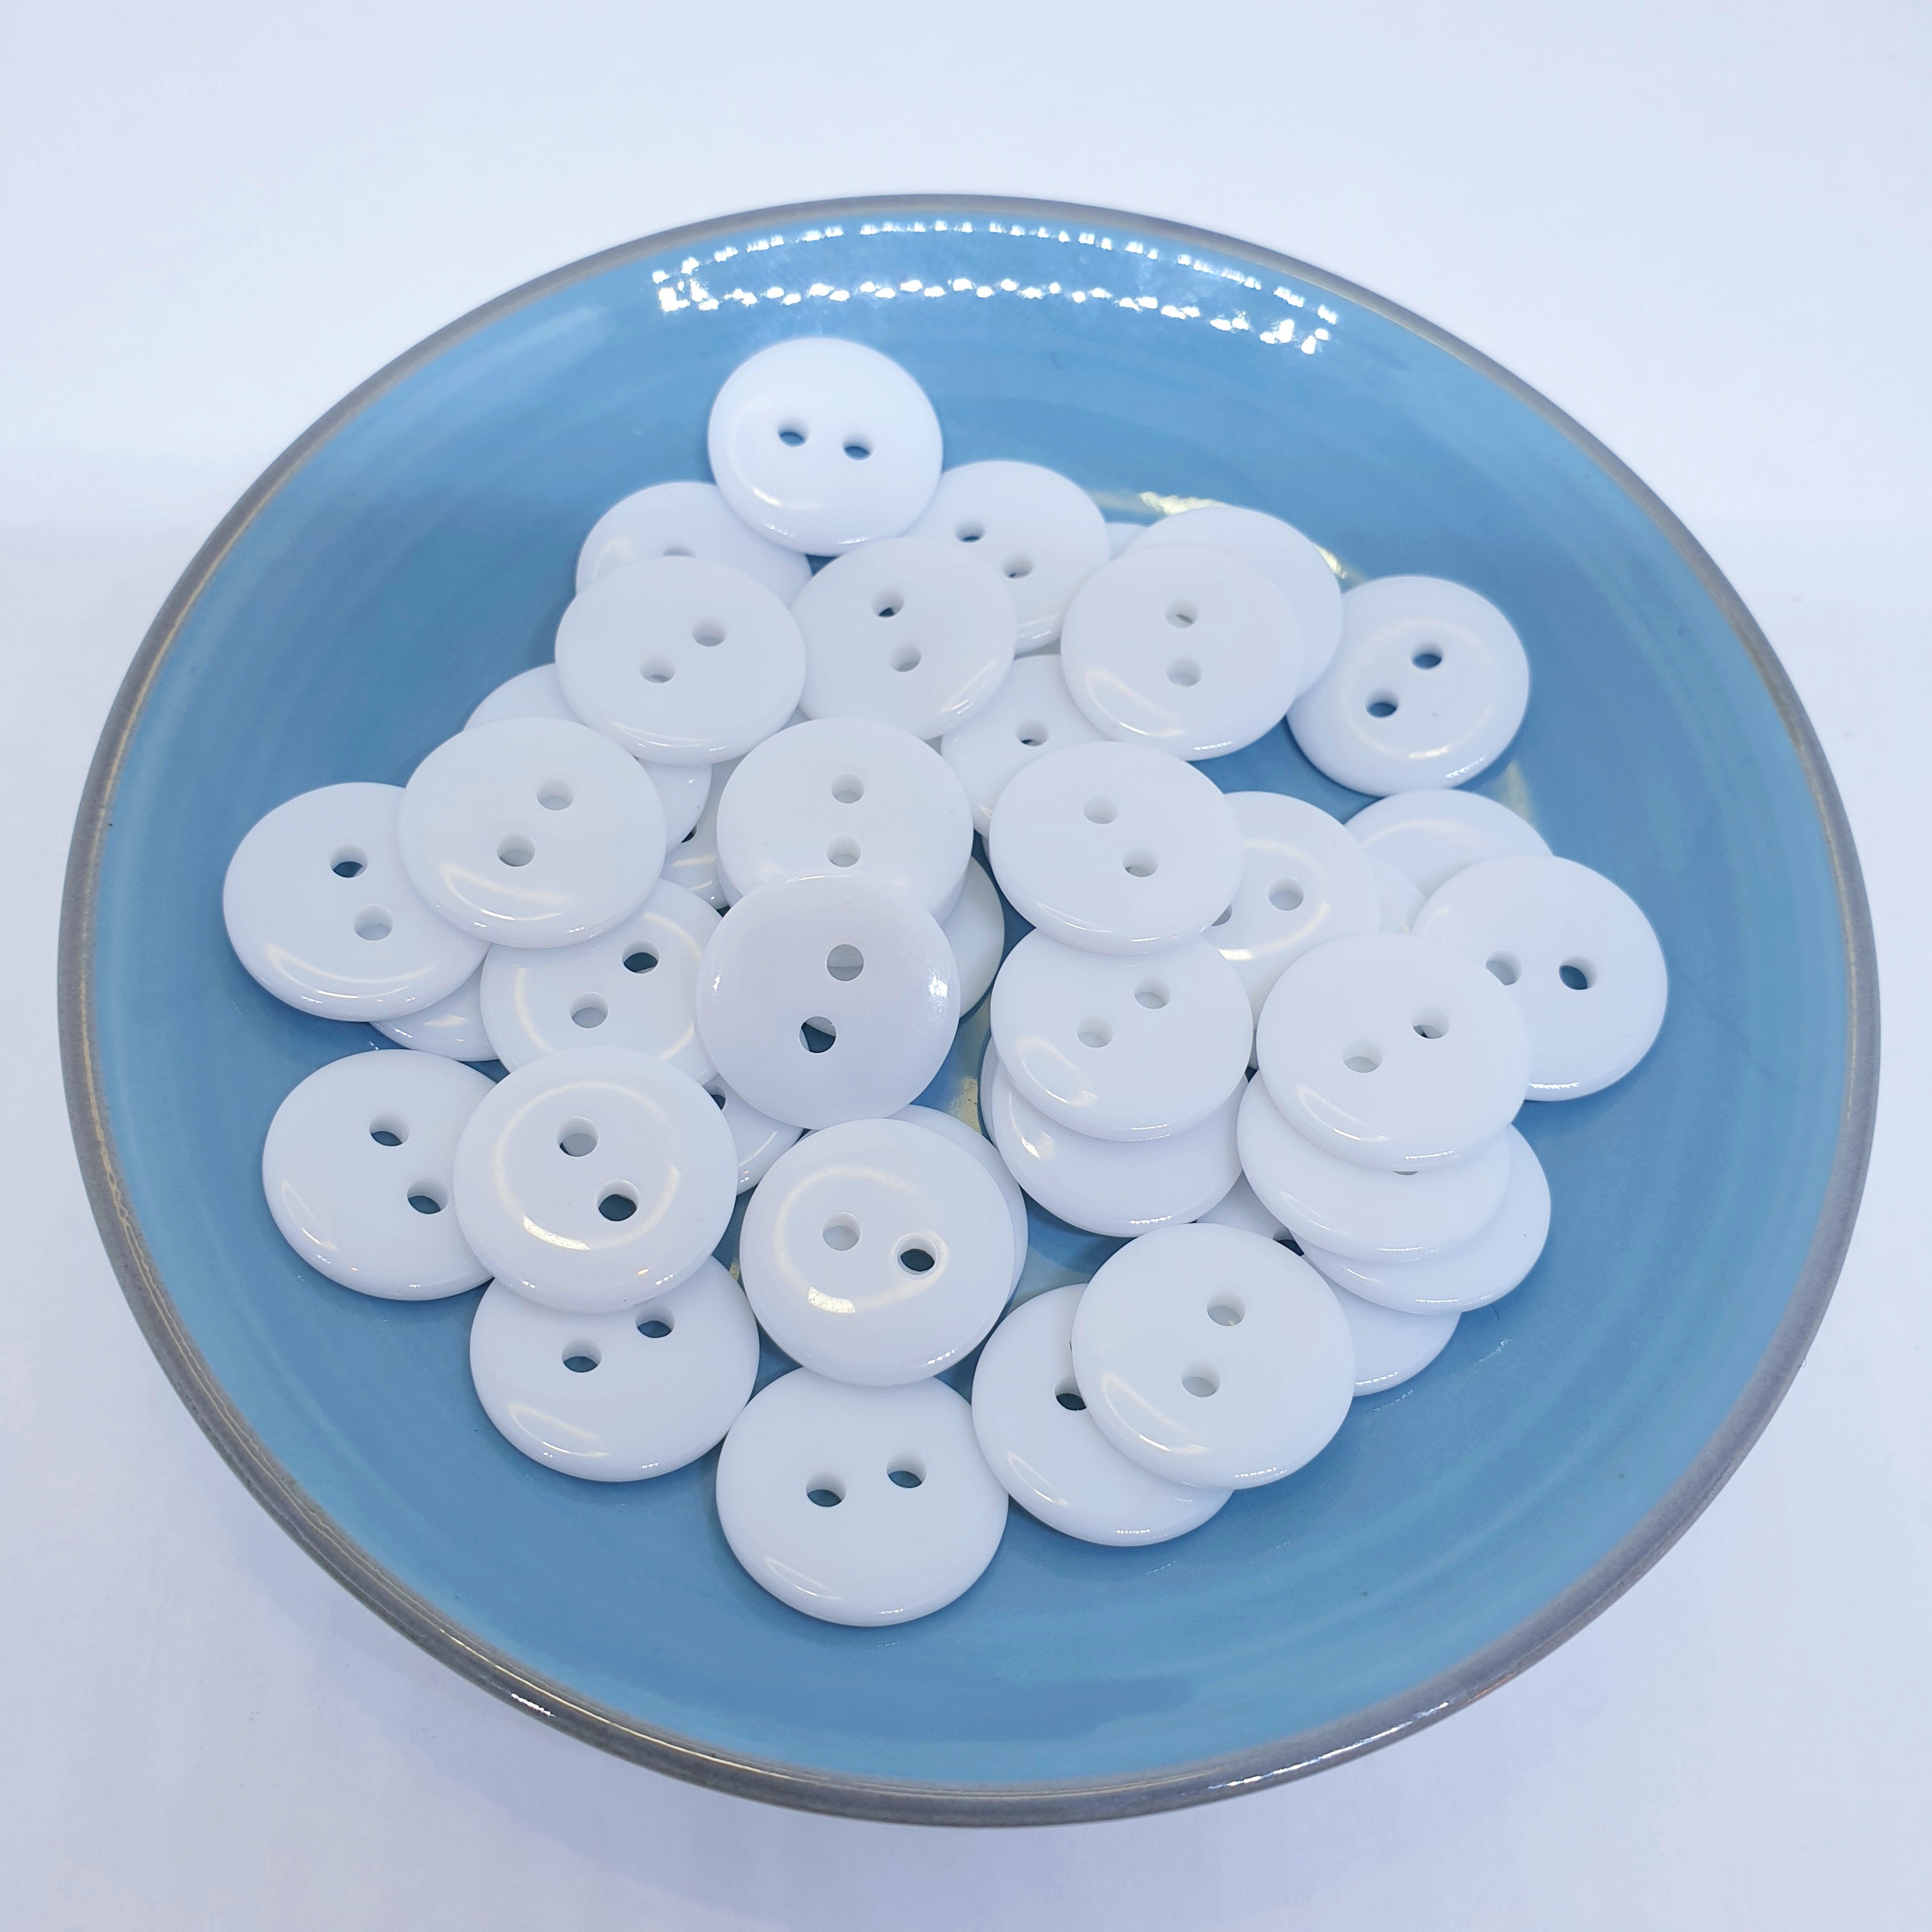 MajorCrafts 72pcs 15mm White 2 Holes Round Resin Sewing Buttons